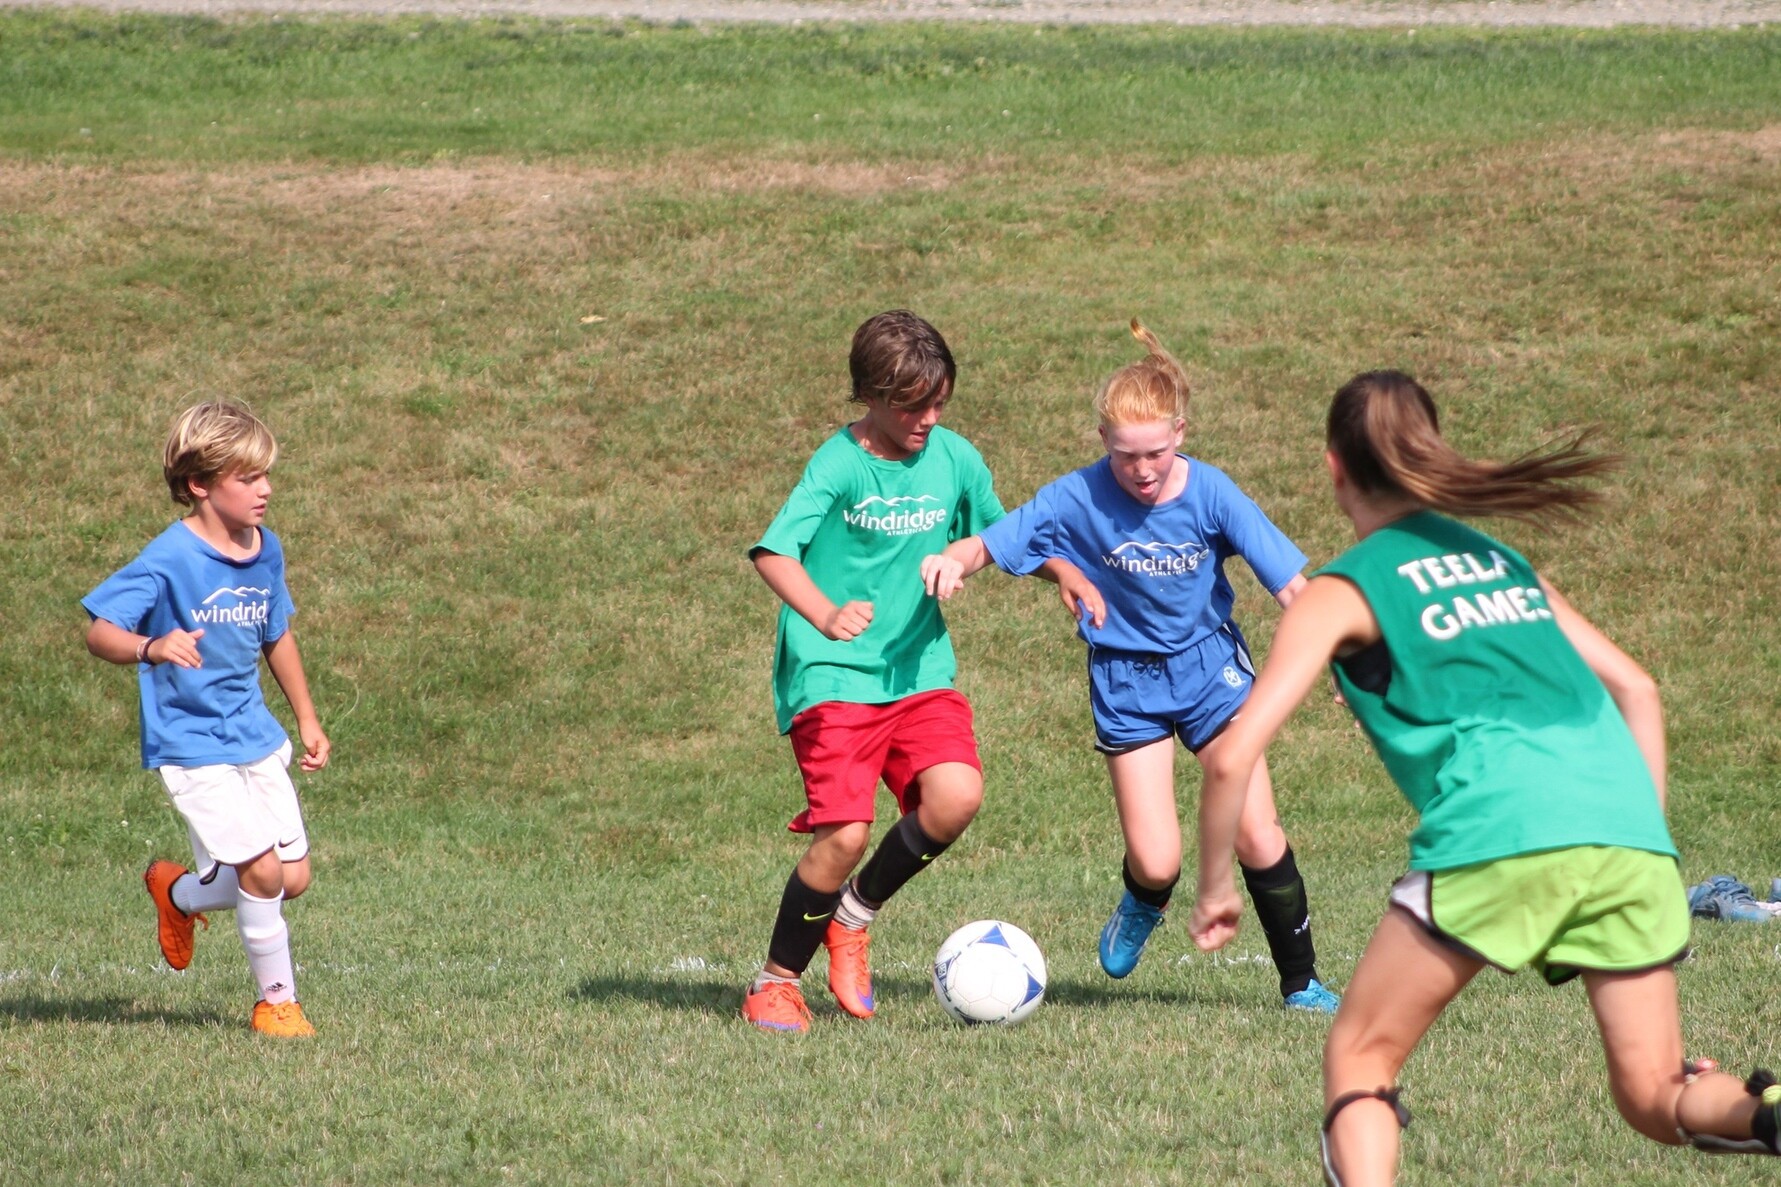 windridge campers playing soccer